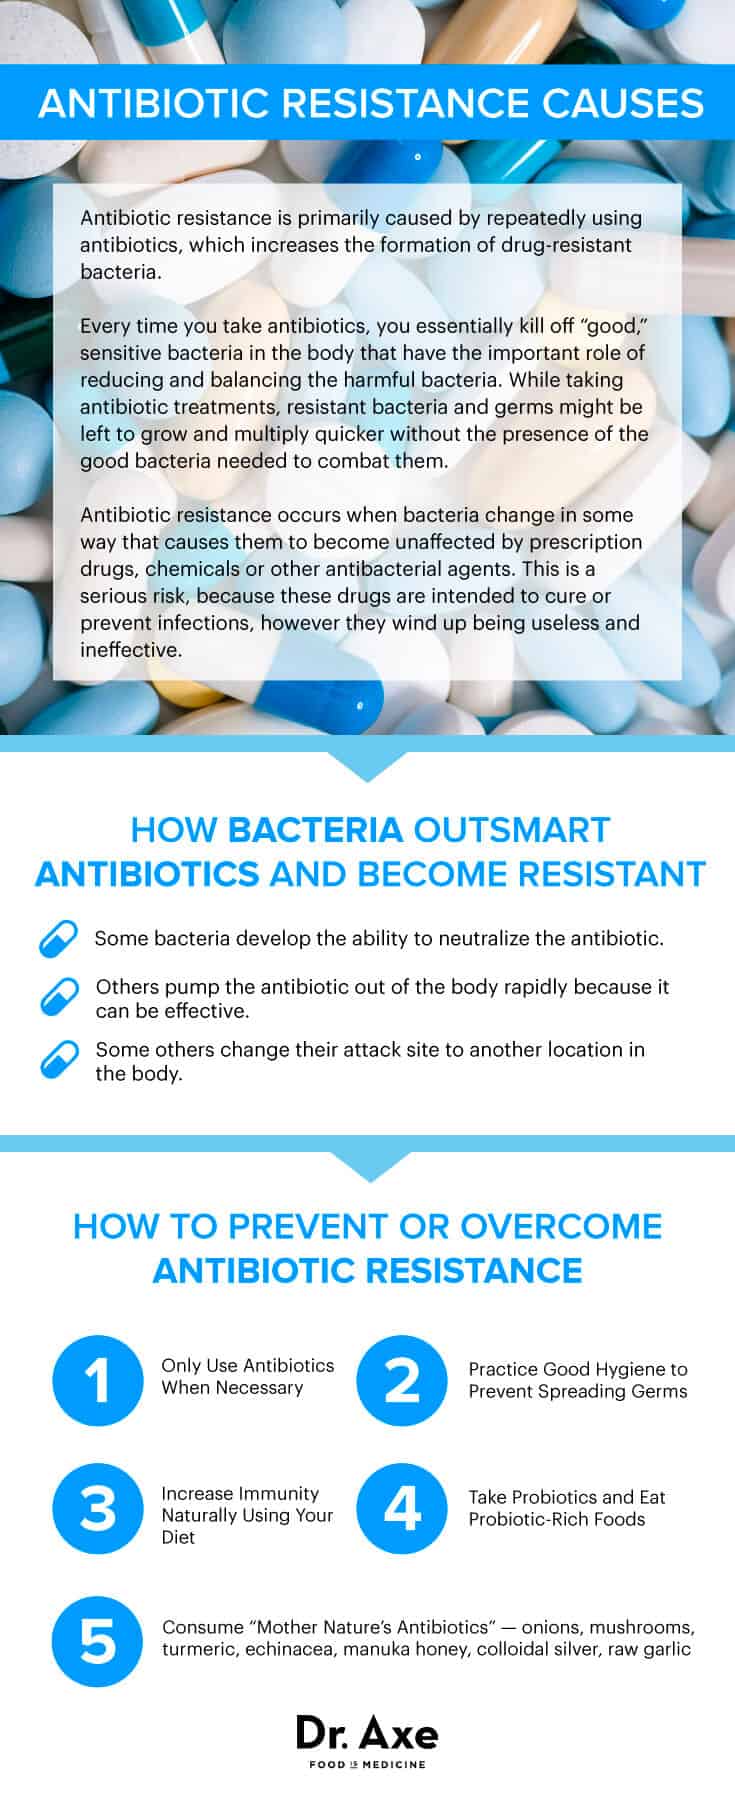 Antibiotic resistance causes & prevention - Dr. Axe